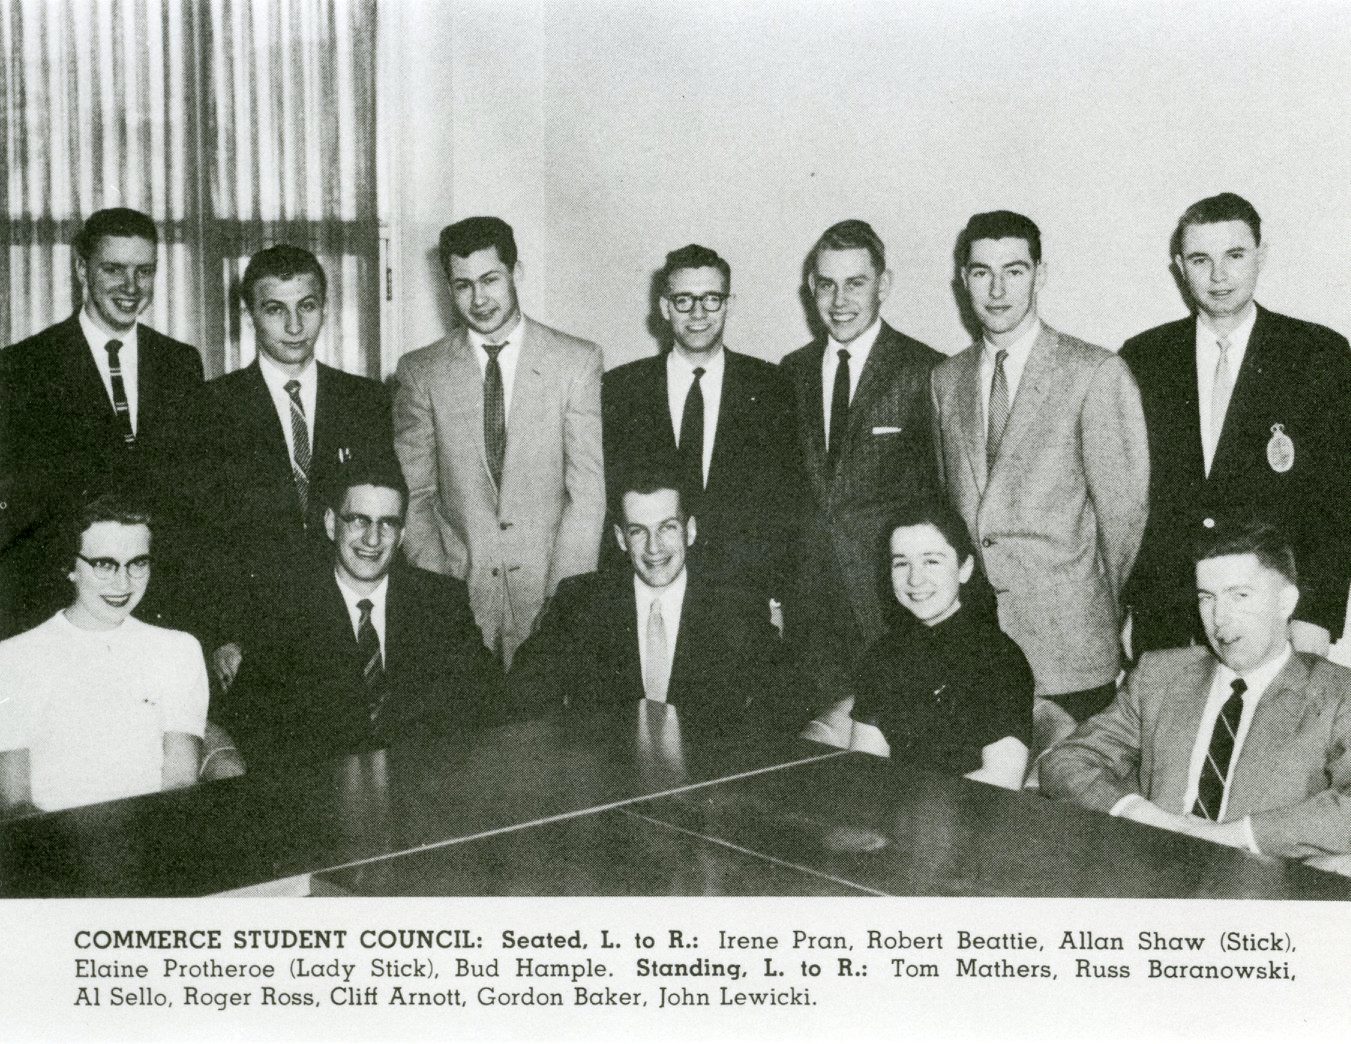 Commerce Student Council, 1958.<br />
Source: University Relations and Information Office fonds